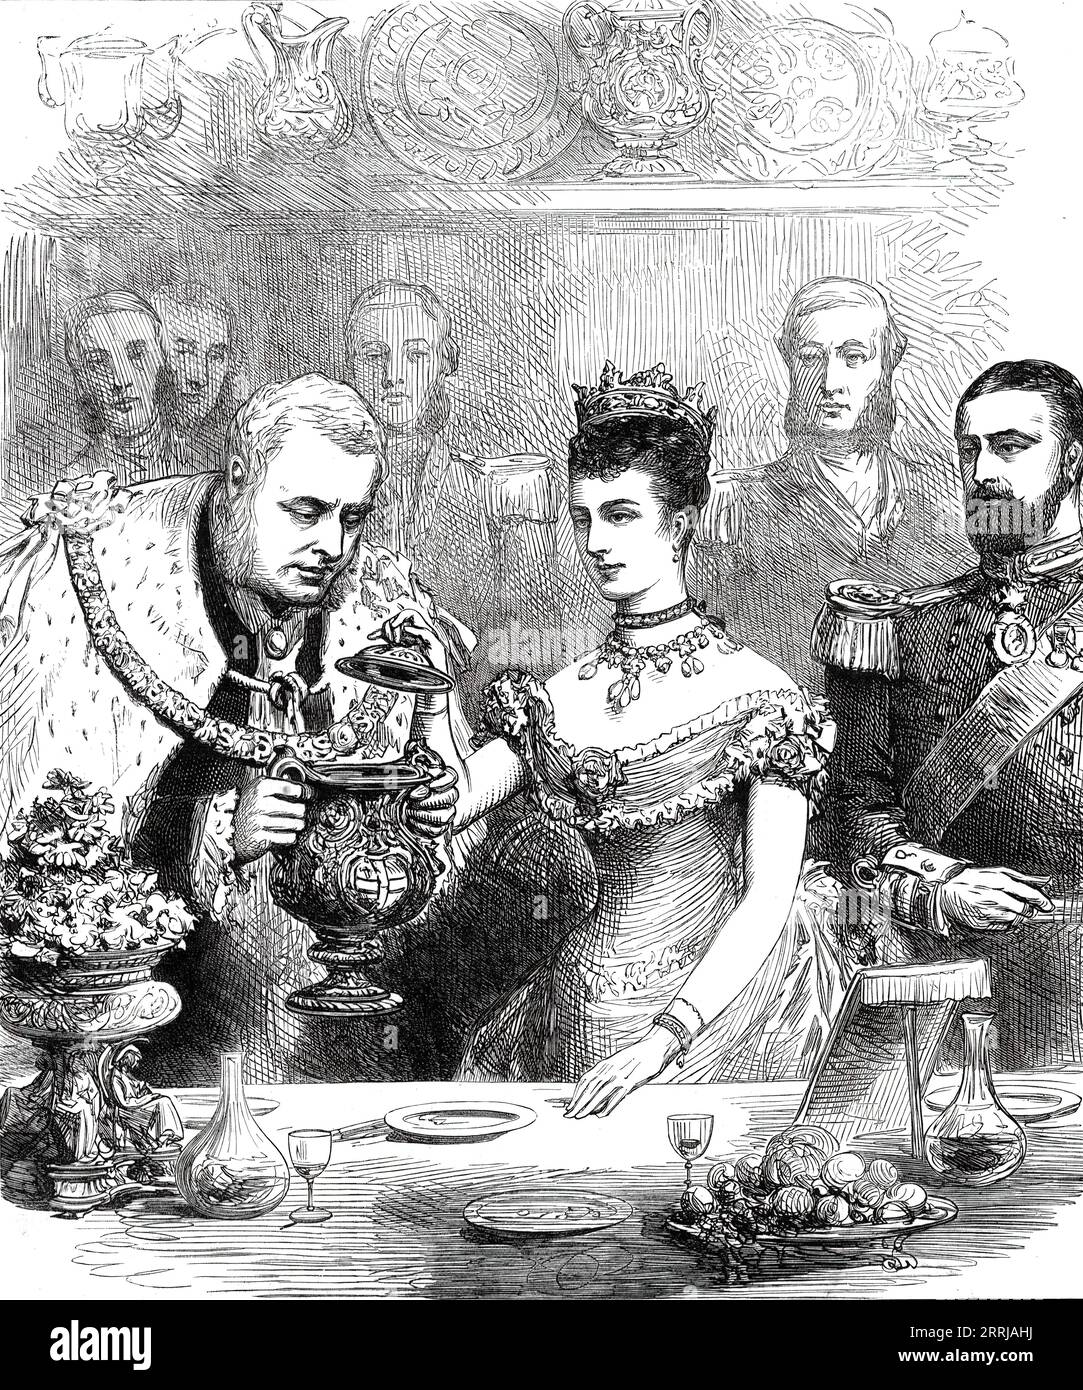 The Guildhall Banquet to the Prince and Princess of Wales: the Loving Cup, 1876. The future King Edward VII and Queen Alexandra are entertained by the Lord Mayor of London: '...the customary handing round and sipping of the Lord Mayor's &quot;loving cup&quot;...[The banquet] was a wondrous sight; and if it did cost twenty thousand pounds, more or less, it was well worth the money; and the evening's entertainment will fully bear the morning's reflection of auditors and finance committees...[it was] the very grandest of grand dinners'. From &quot;Illustrated London News&quot;, 1876. Stock Photo